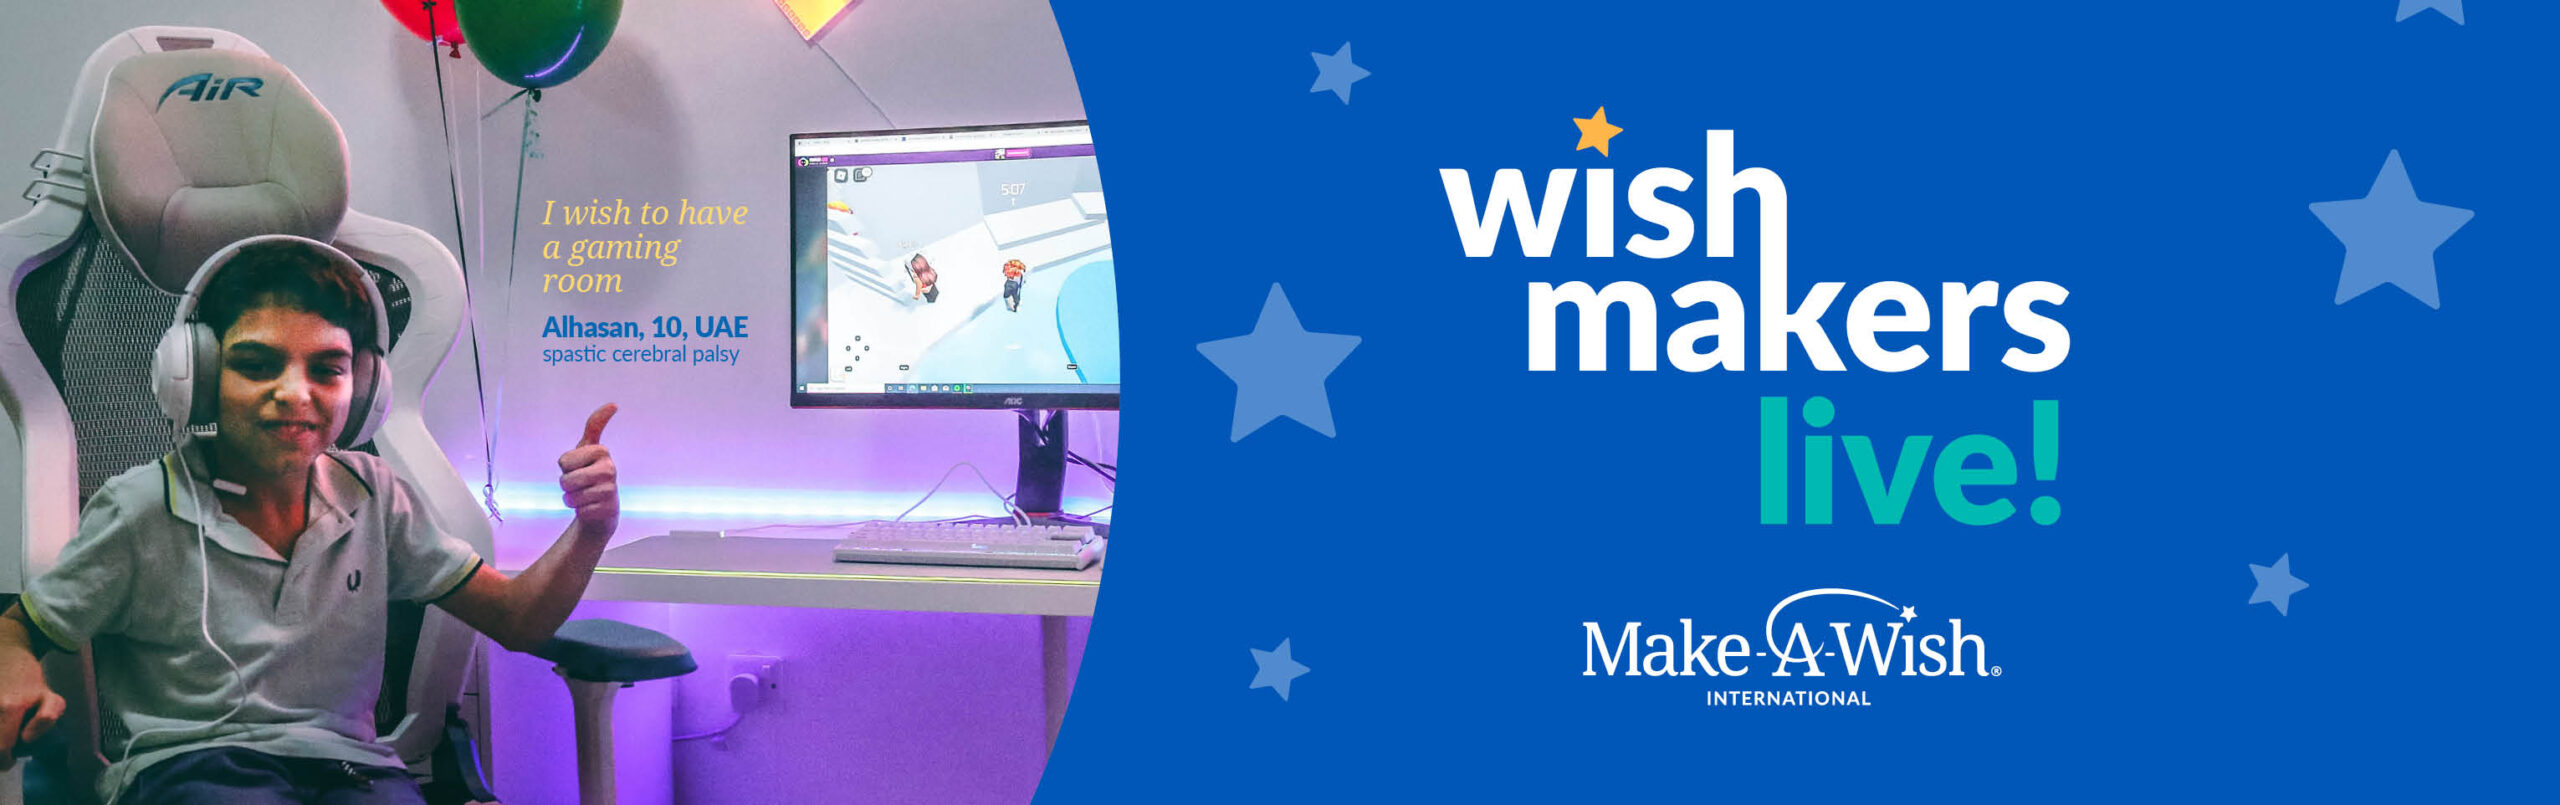 Streaming For The Wishes web landing page header